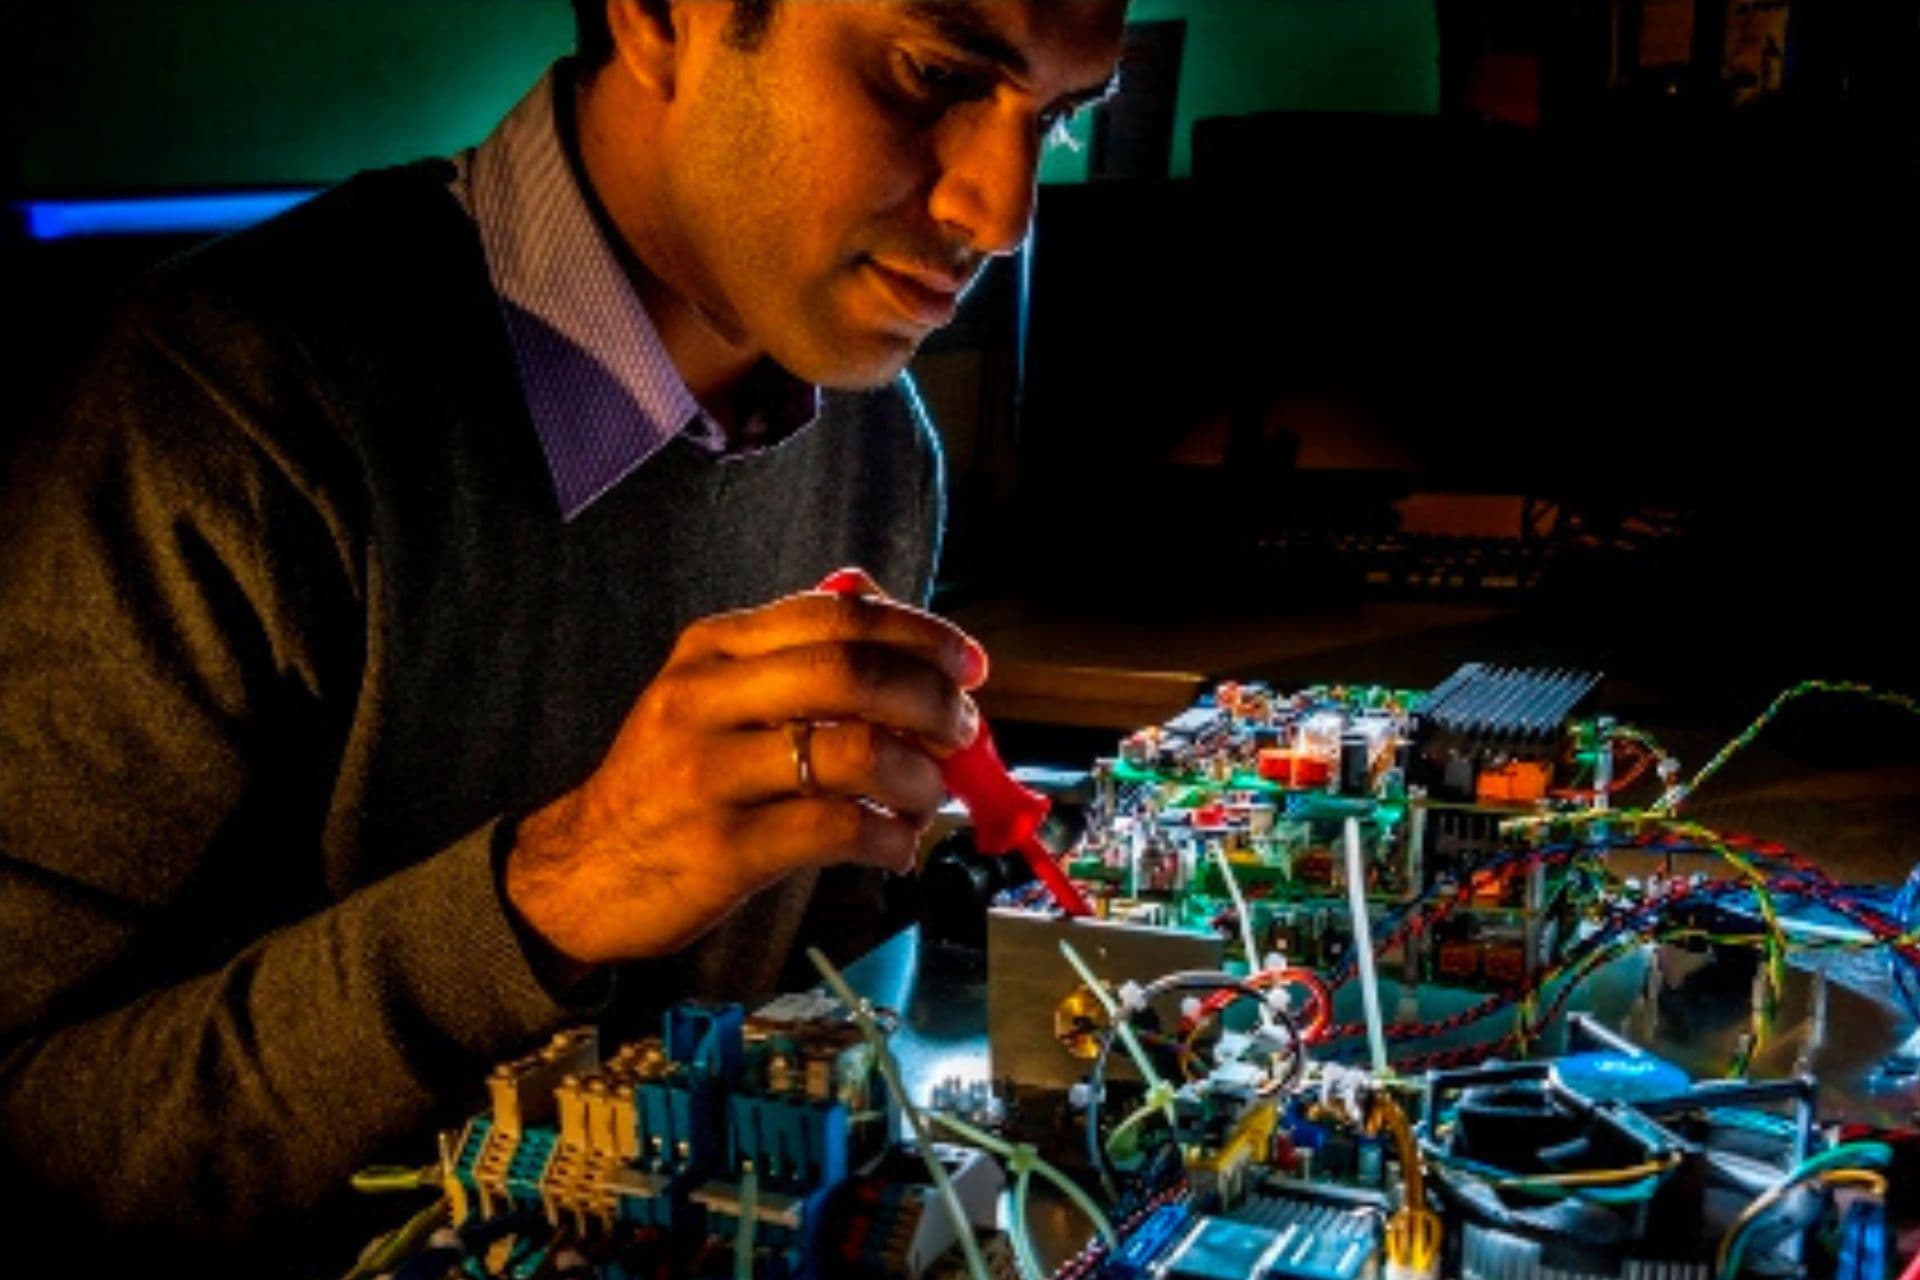 A researcher working on electronic components